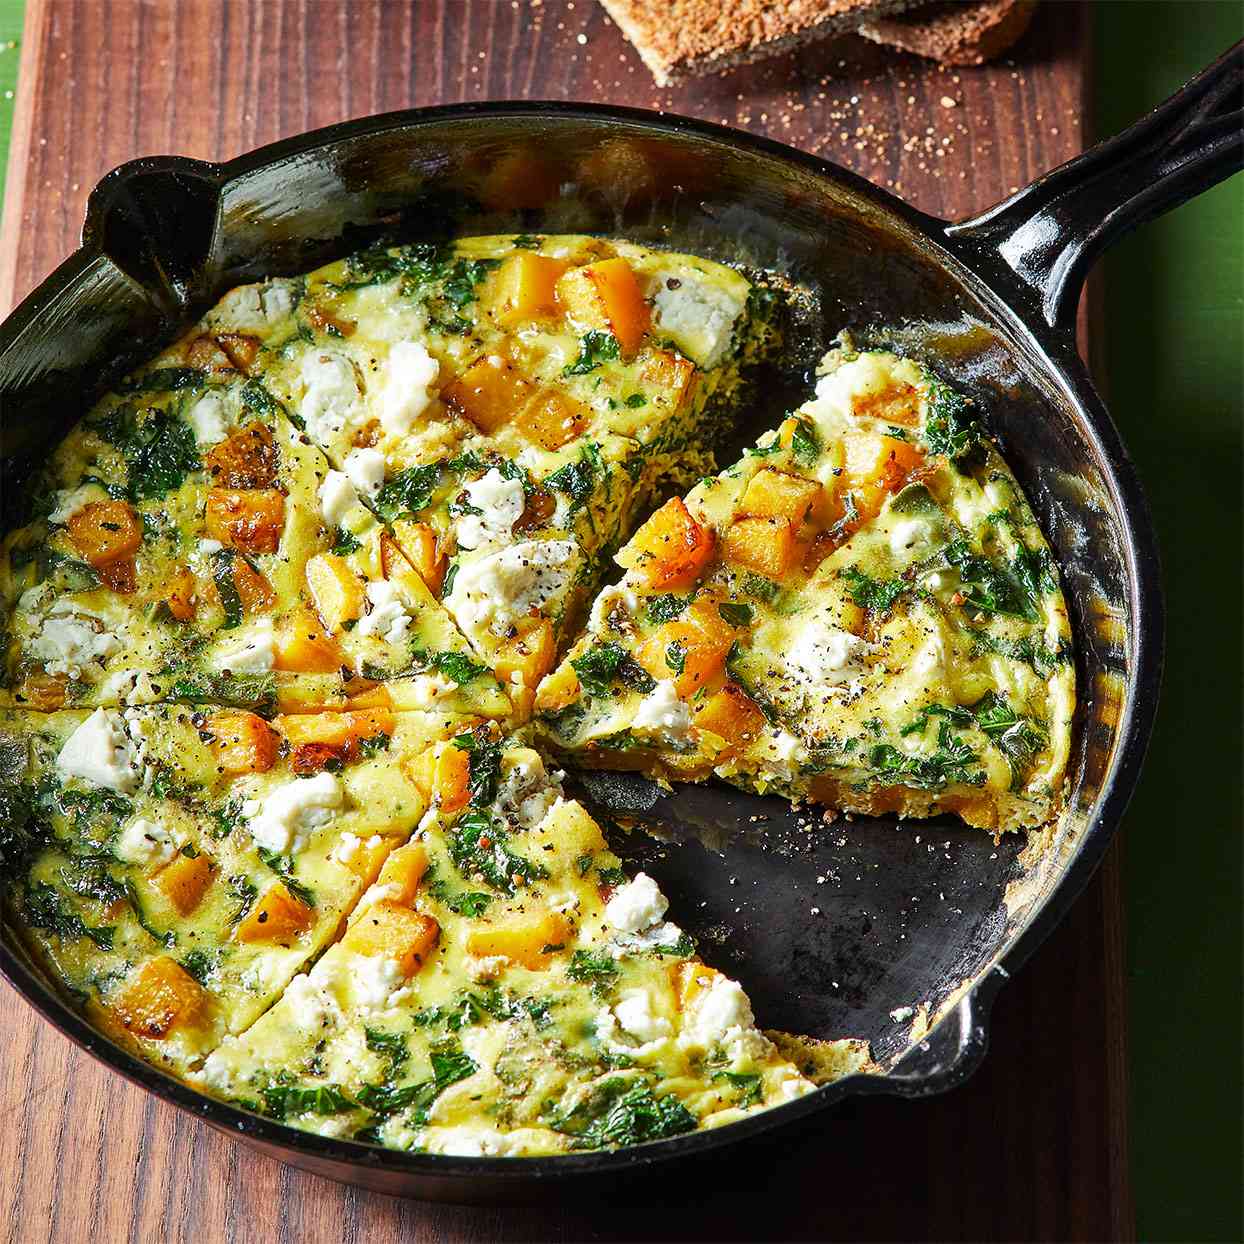 Baked Frittata with Butternut Squash, Kale & Sage